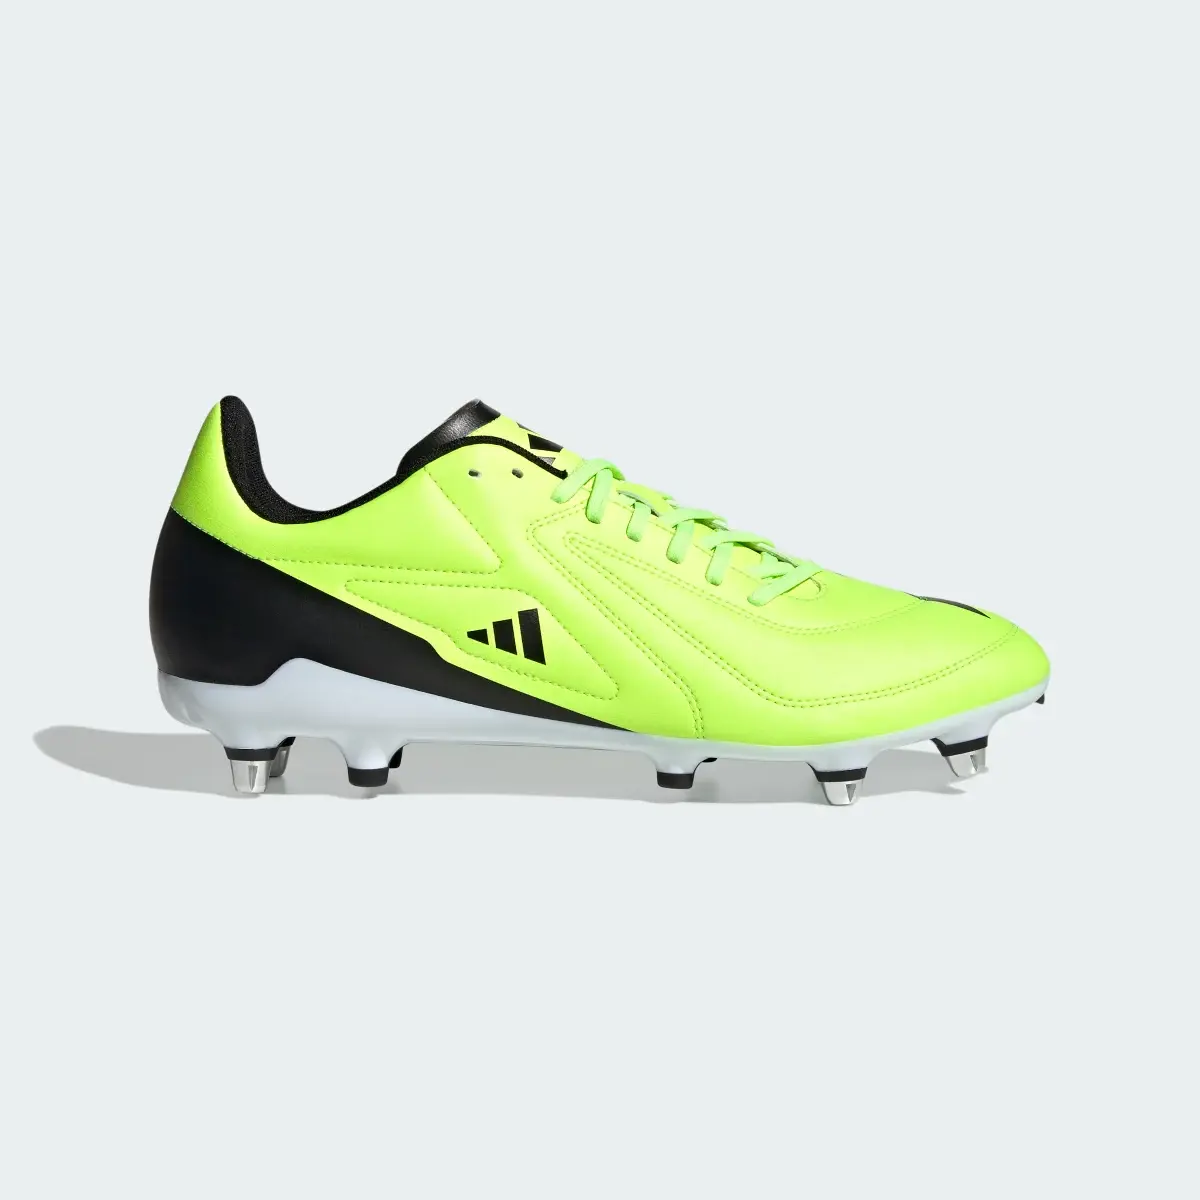 Adidas RS15 Soft Ground Rugby Boots. 2